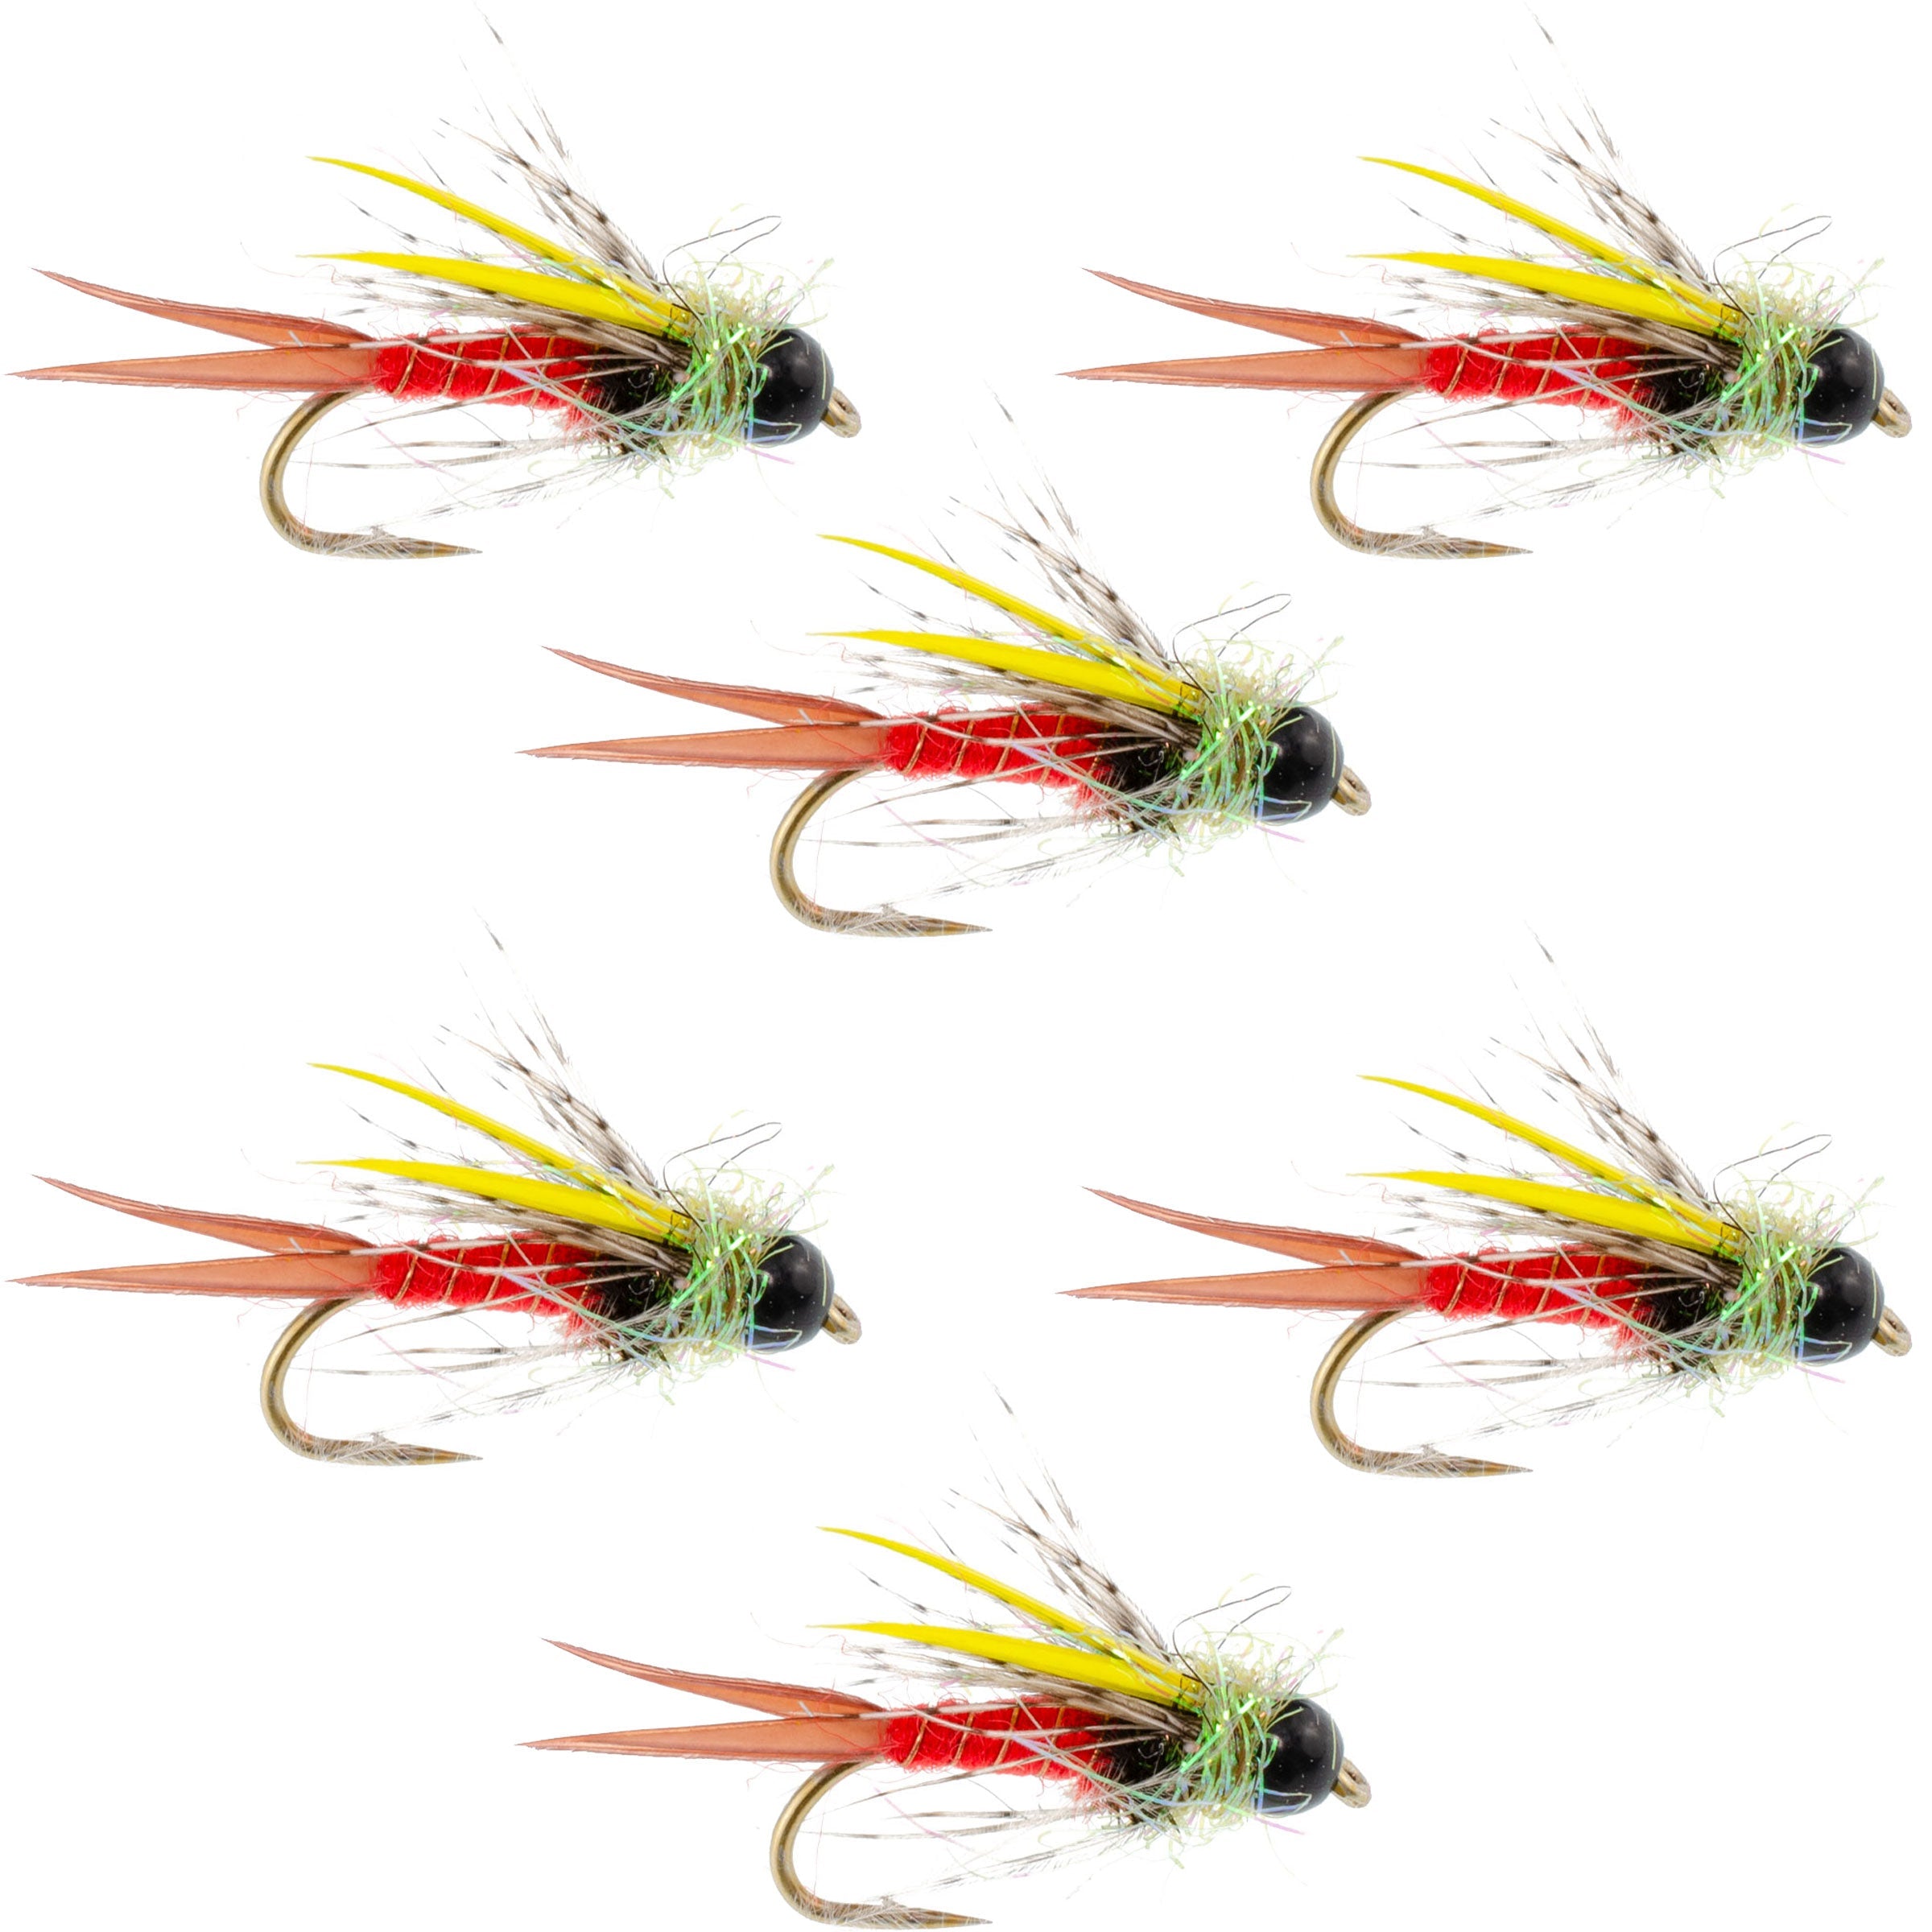 Tungsten Bead Head Nicks Prince Special Nymph Fly Fishing Flies - Set of 6 Flies Hook Size 12